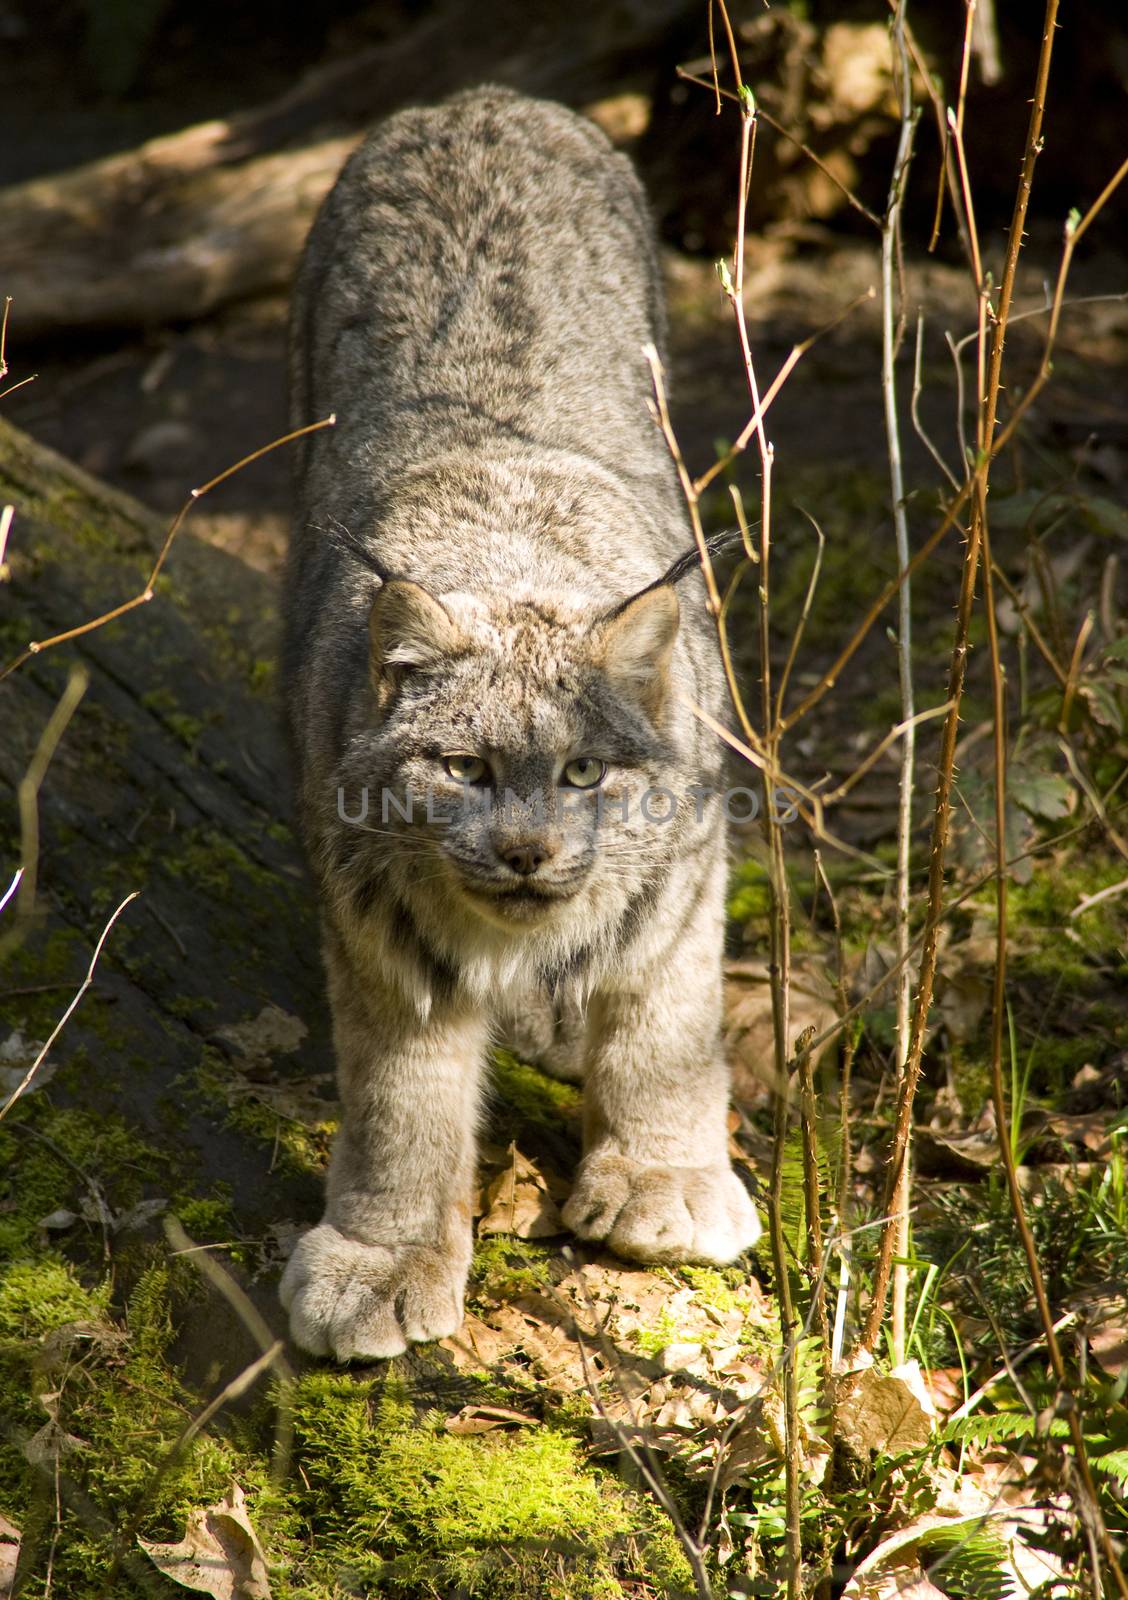 Bobcat by ChrisBoswell